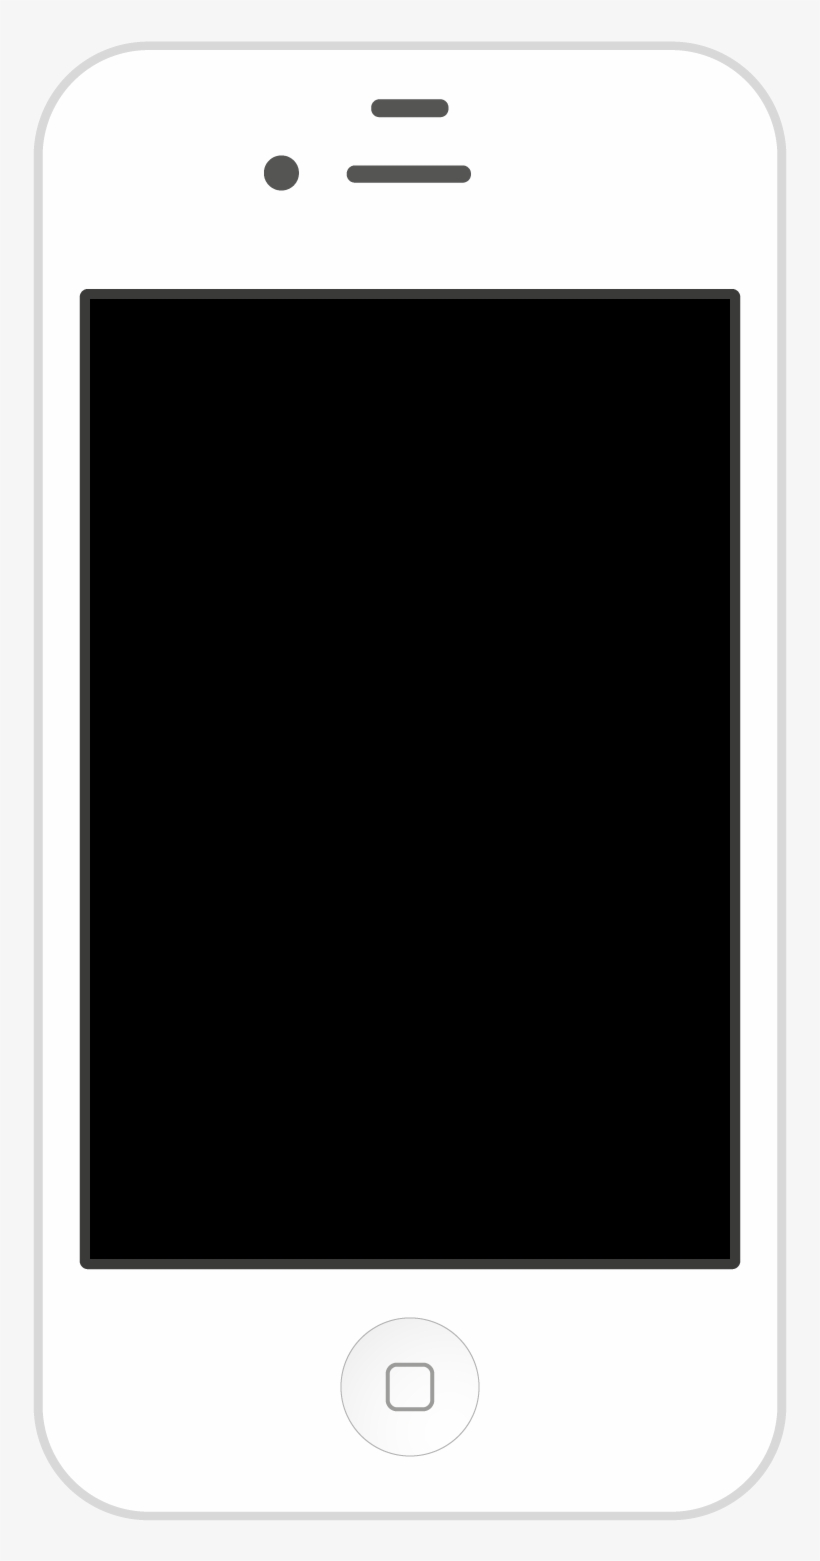 Iphone Template Png - Iphone 4s Png Template, transparent png #1038407